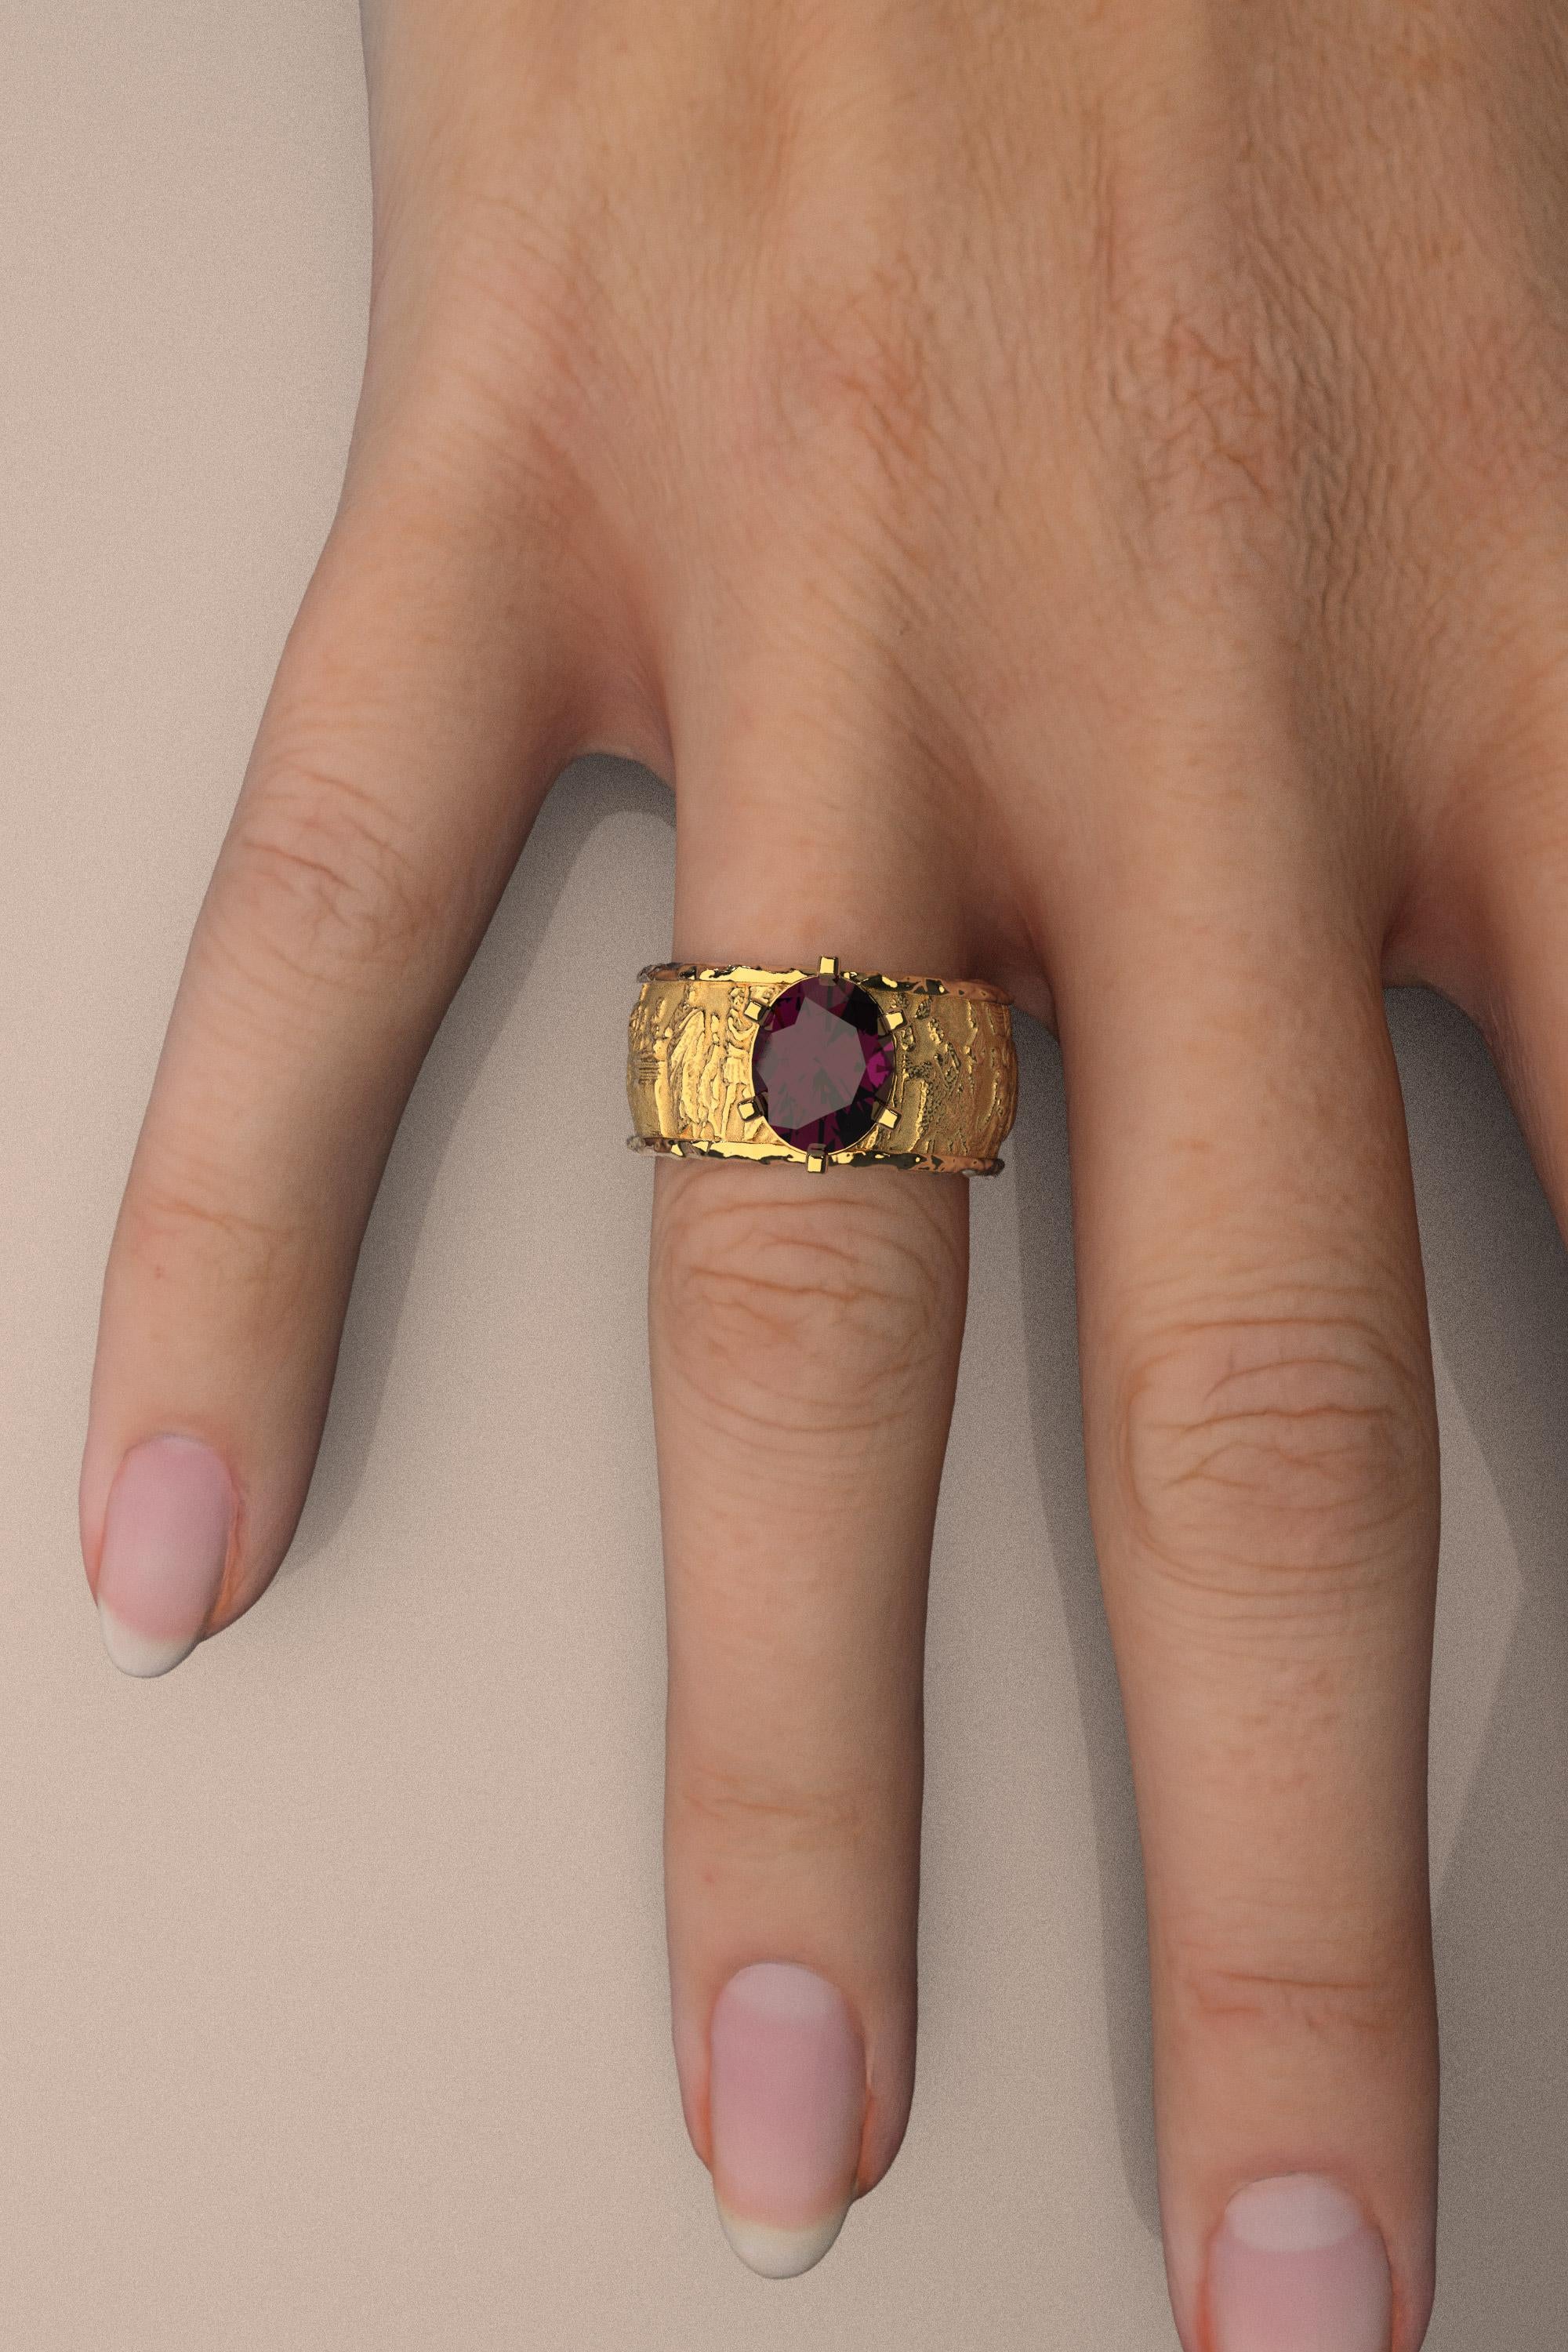 For Sale:  Natural Purple Garnet Ring in 14k Gold Made in Italy, for Men or for Women 5